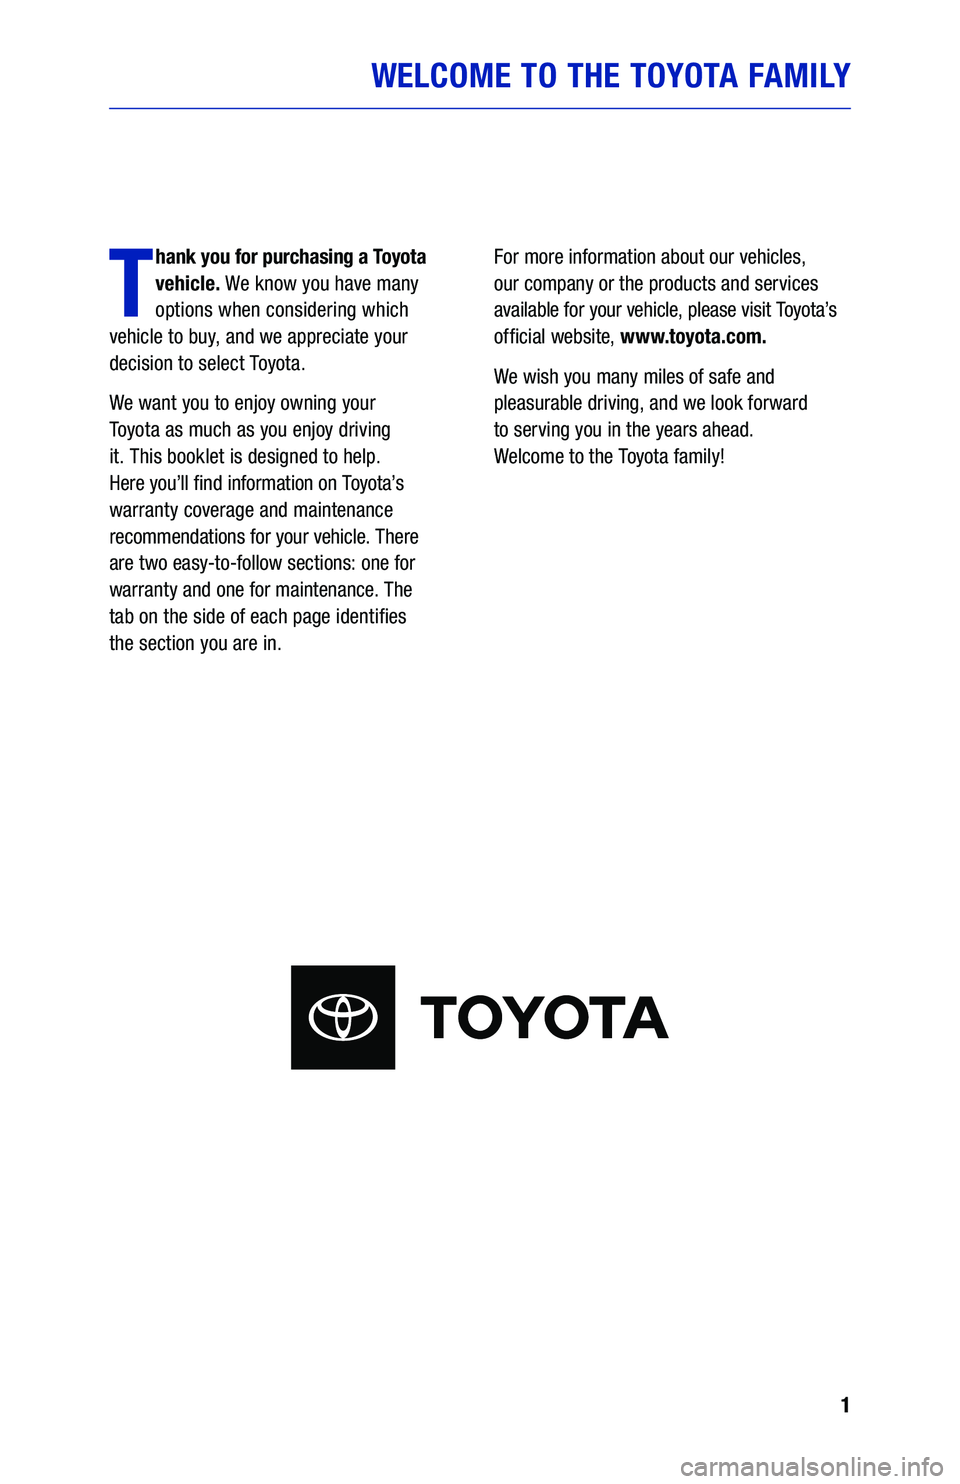 TOYOTA RAV4 2021  Warranties & Maintenance Guides (in English) 1
WELCOME TO THE TOYOTA FAMILY
T
hank you for purchasing a Toyota 
vehicle. We know you have many 
options when considering which   
vehicle to buy, and we appreciate your 
decision to select Toyota.
